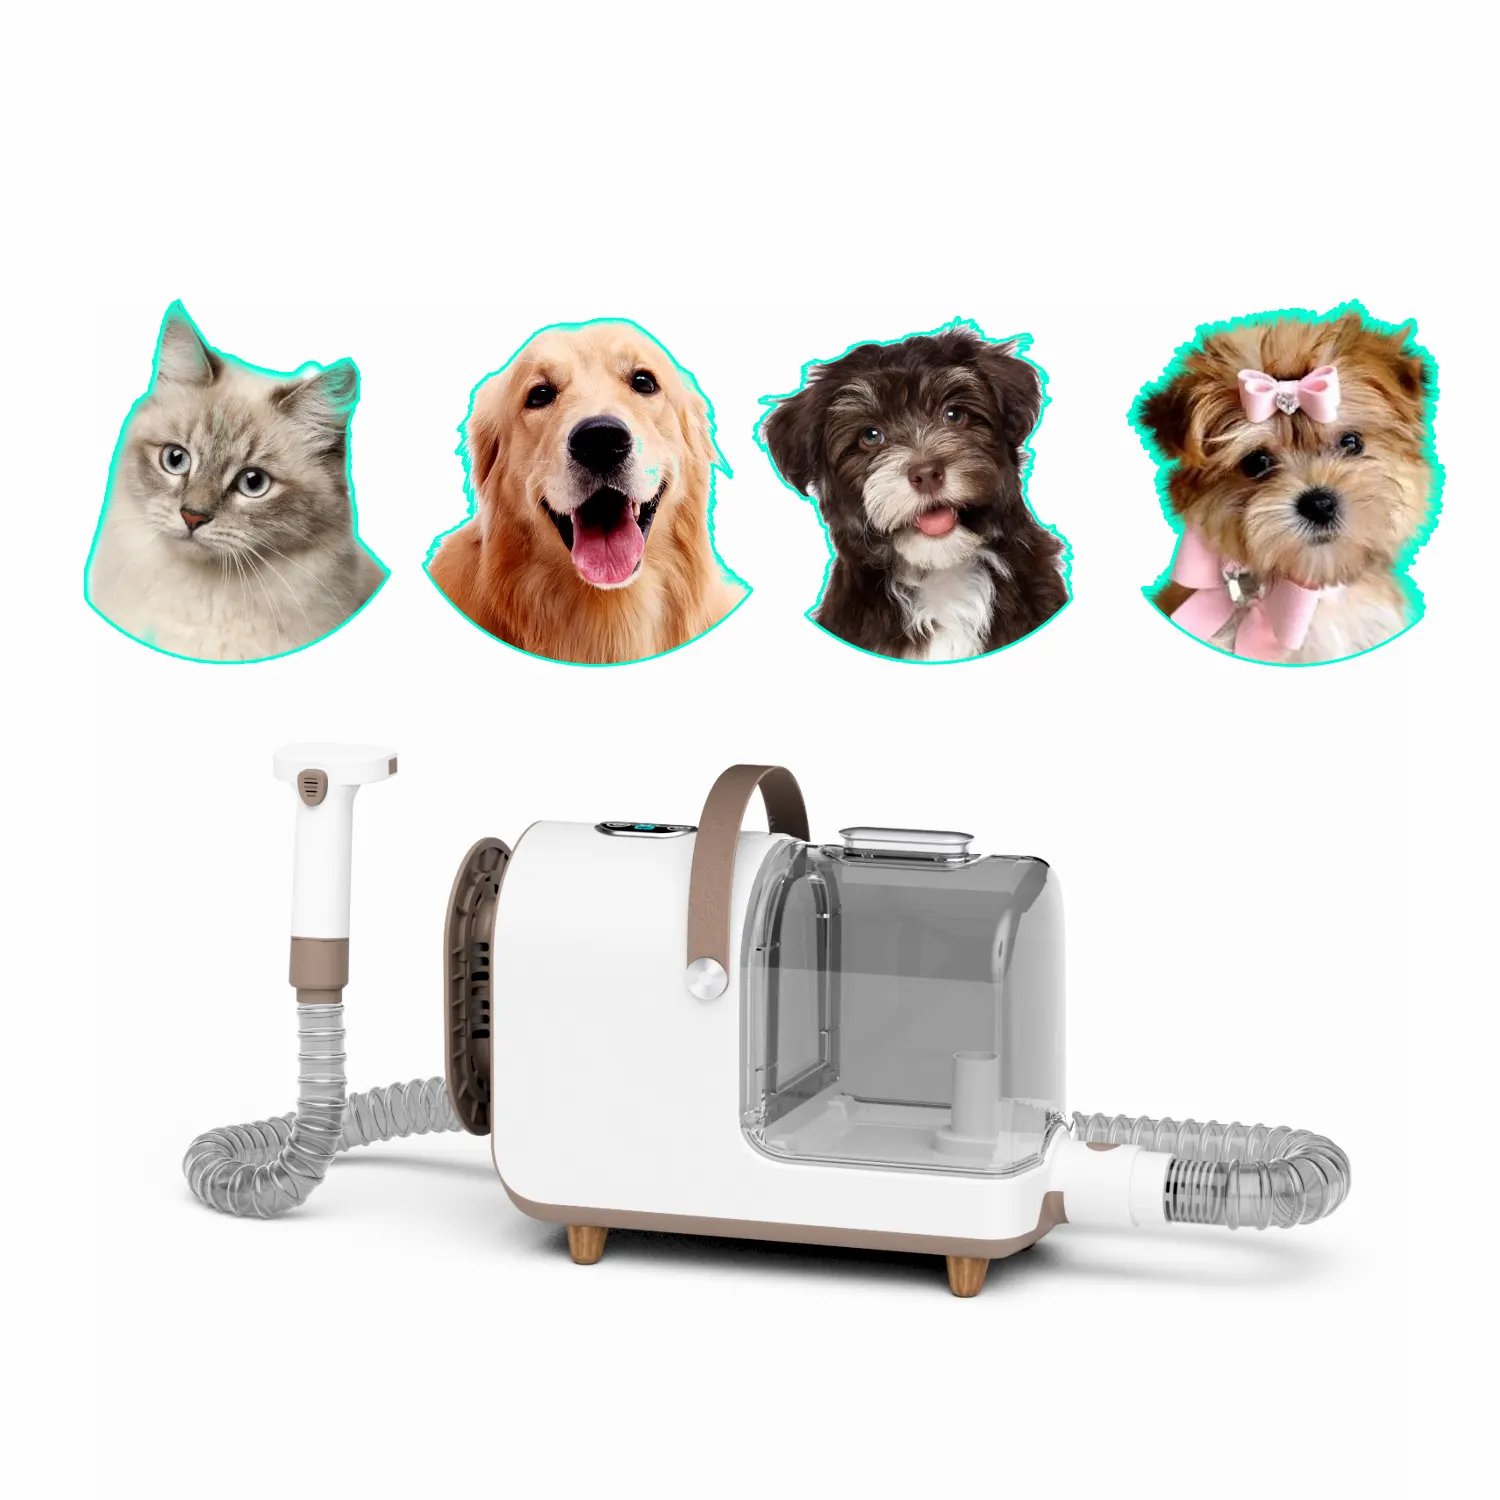 Automatic Pet Cat Dog Hair Cutter and Vacuum Cleaner with Grooming Kit Brushes Trimmers Blades for Pet Hair